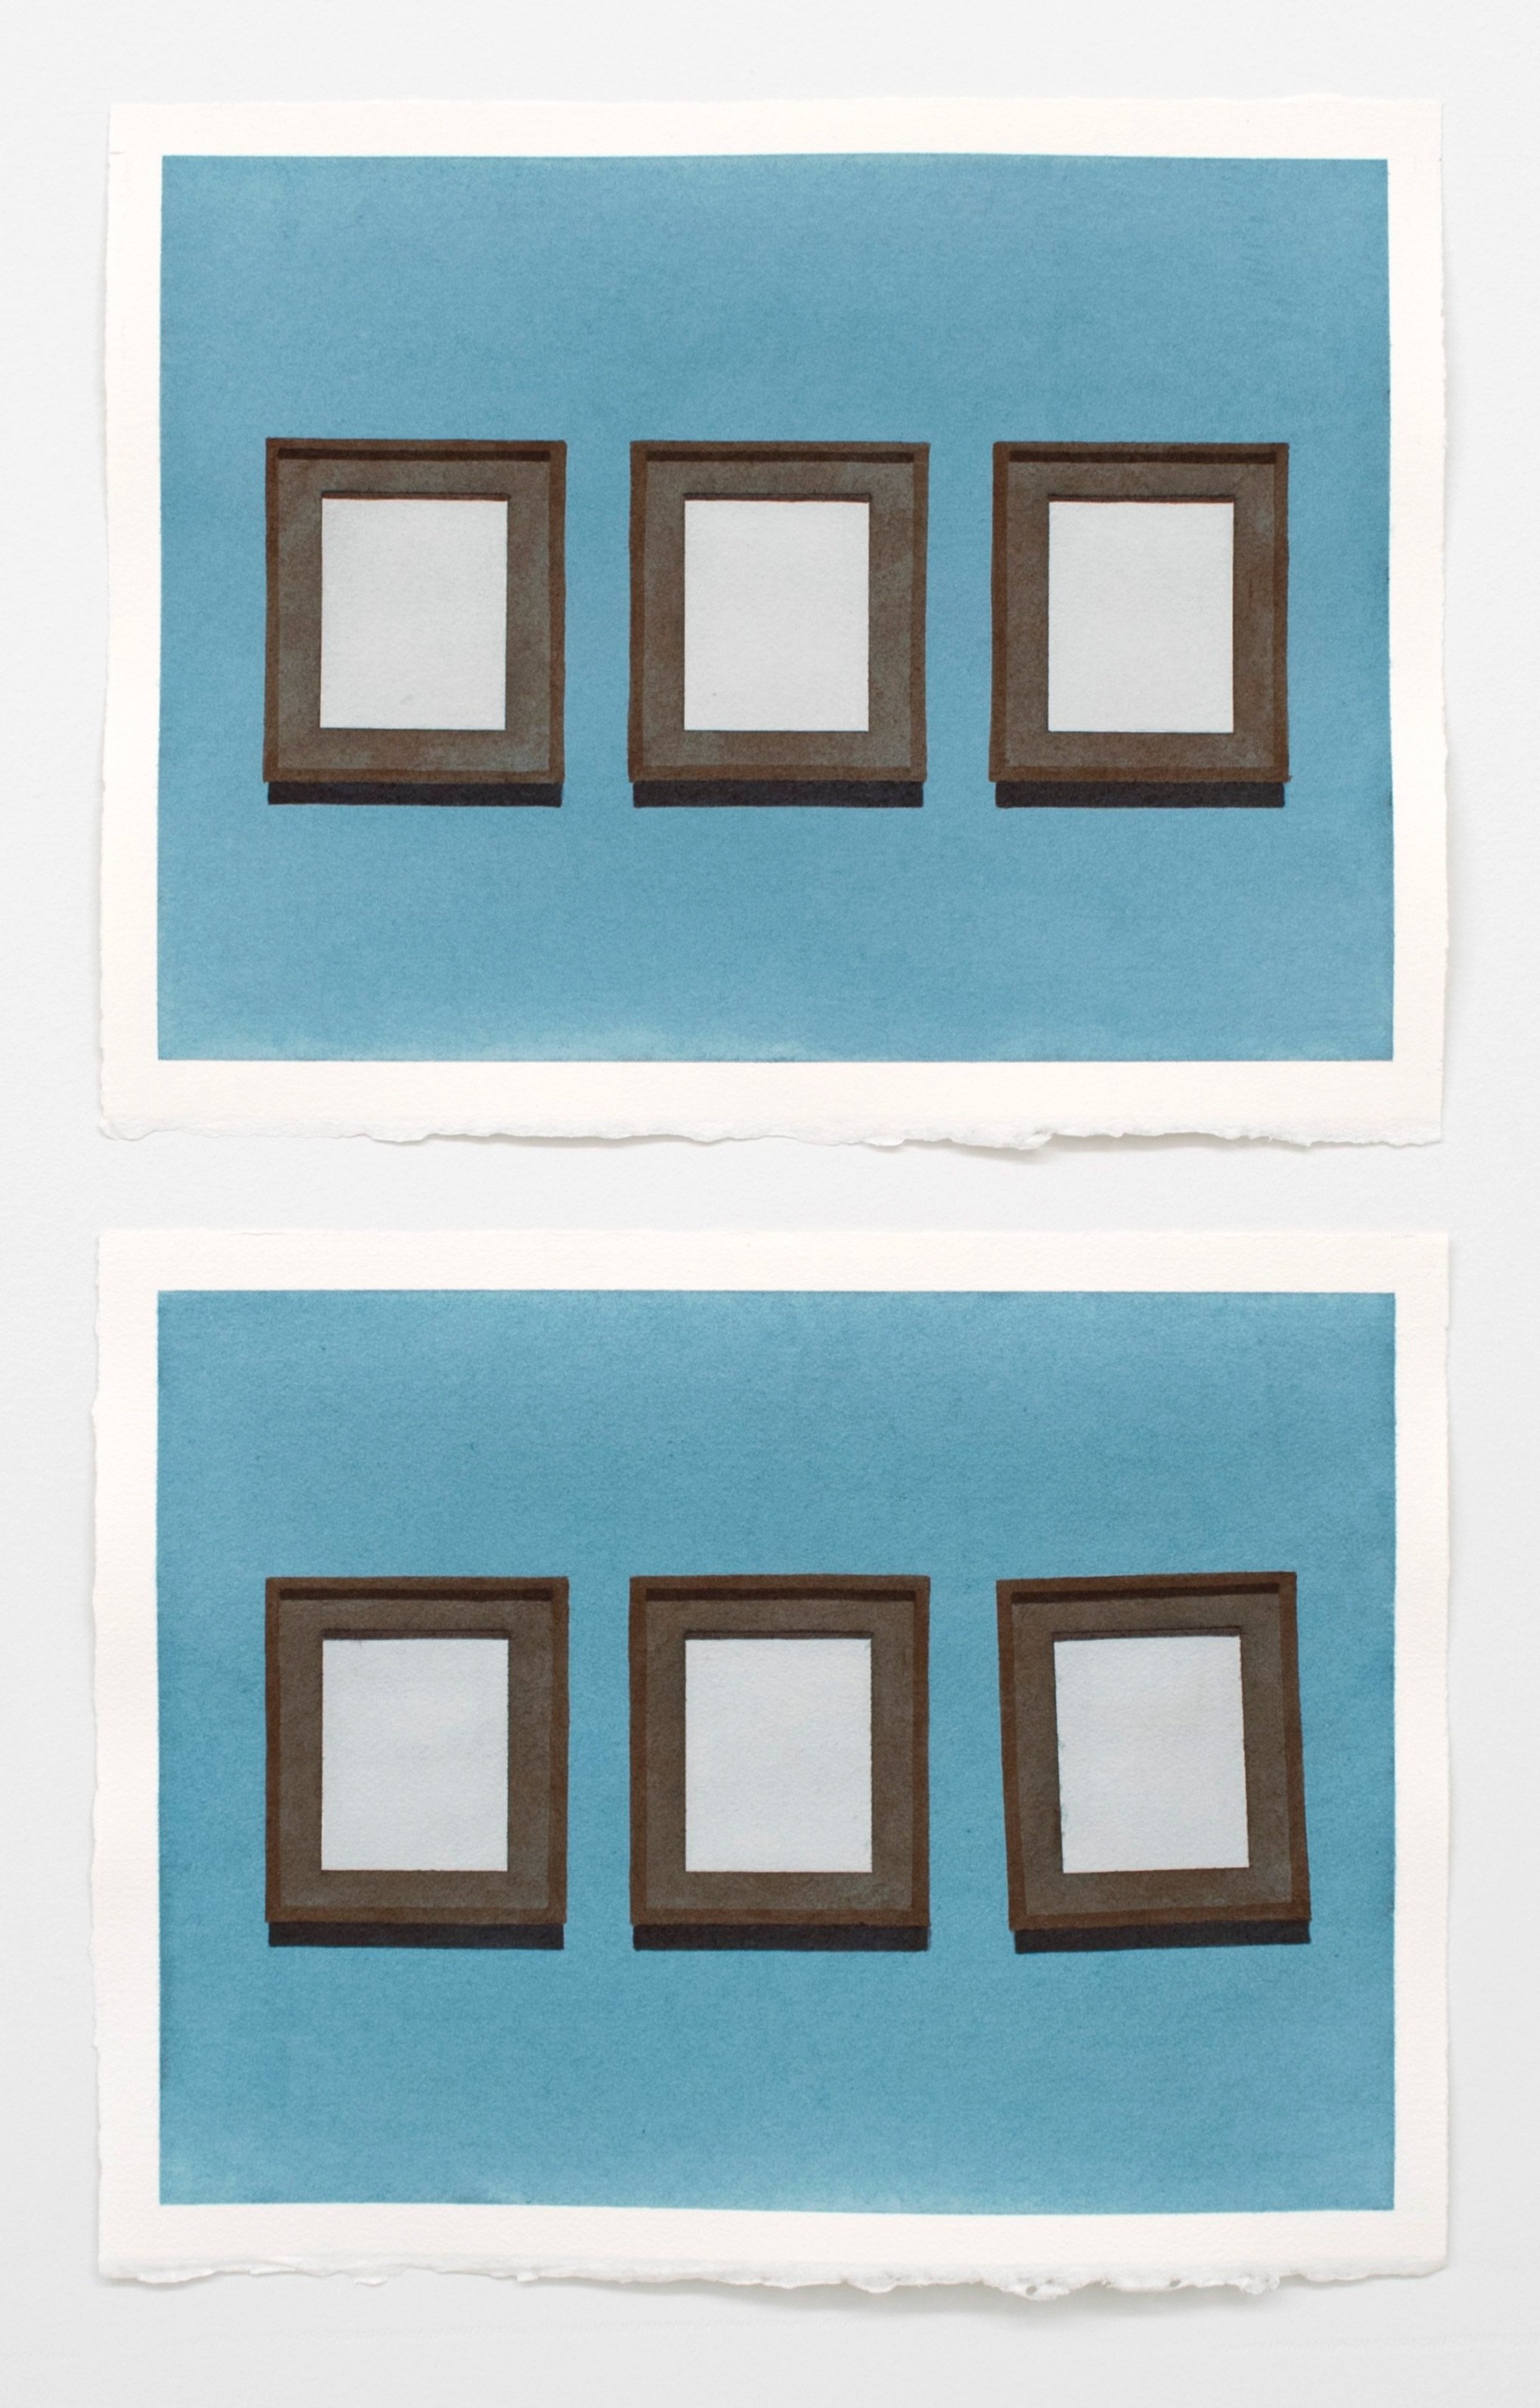   Adjustment No 2.  Diptych, 10” x 13” each Watercolor on paper 2018 